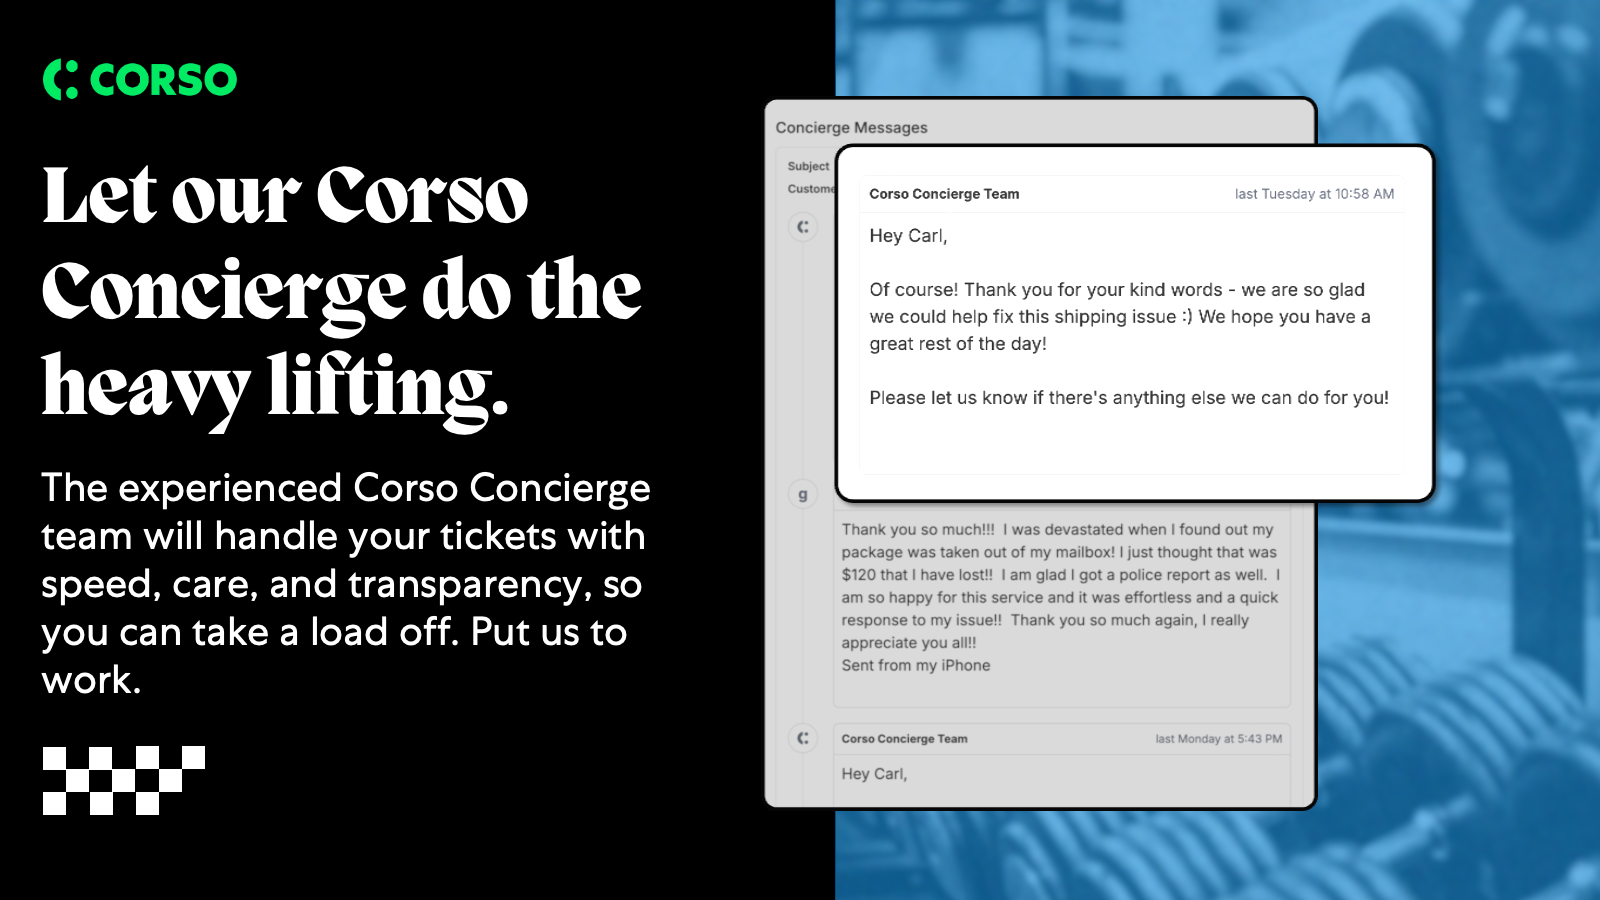 Let the Corso Concierge do what they do best